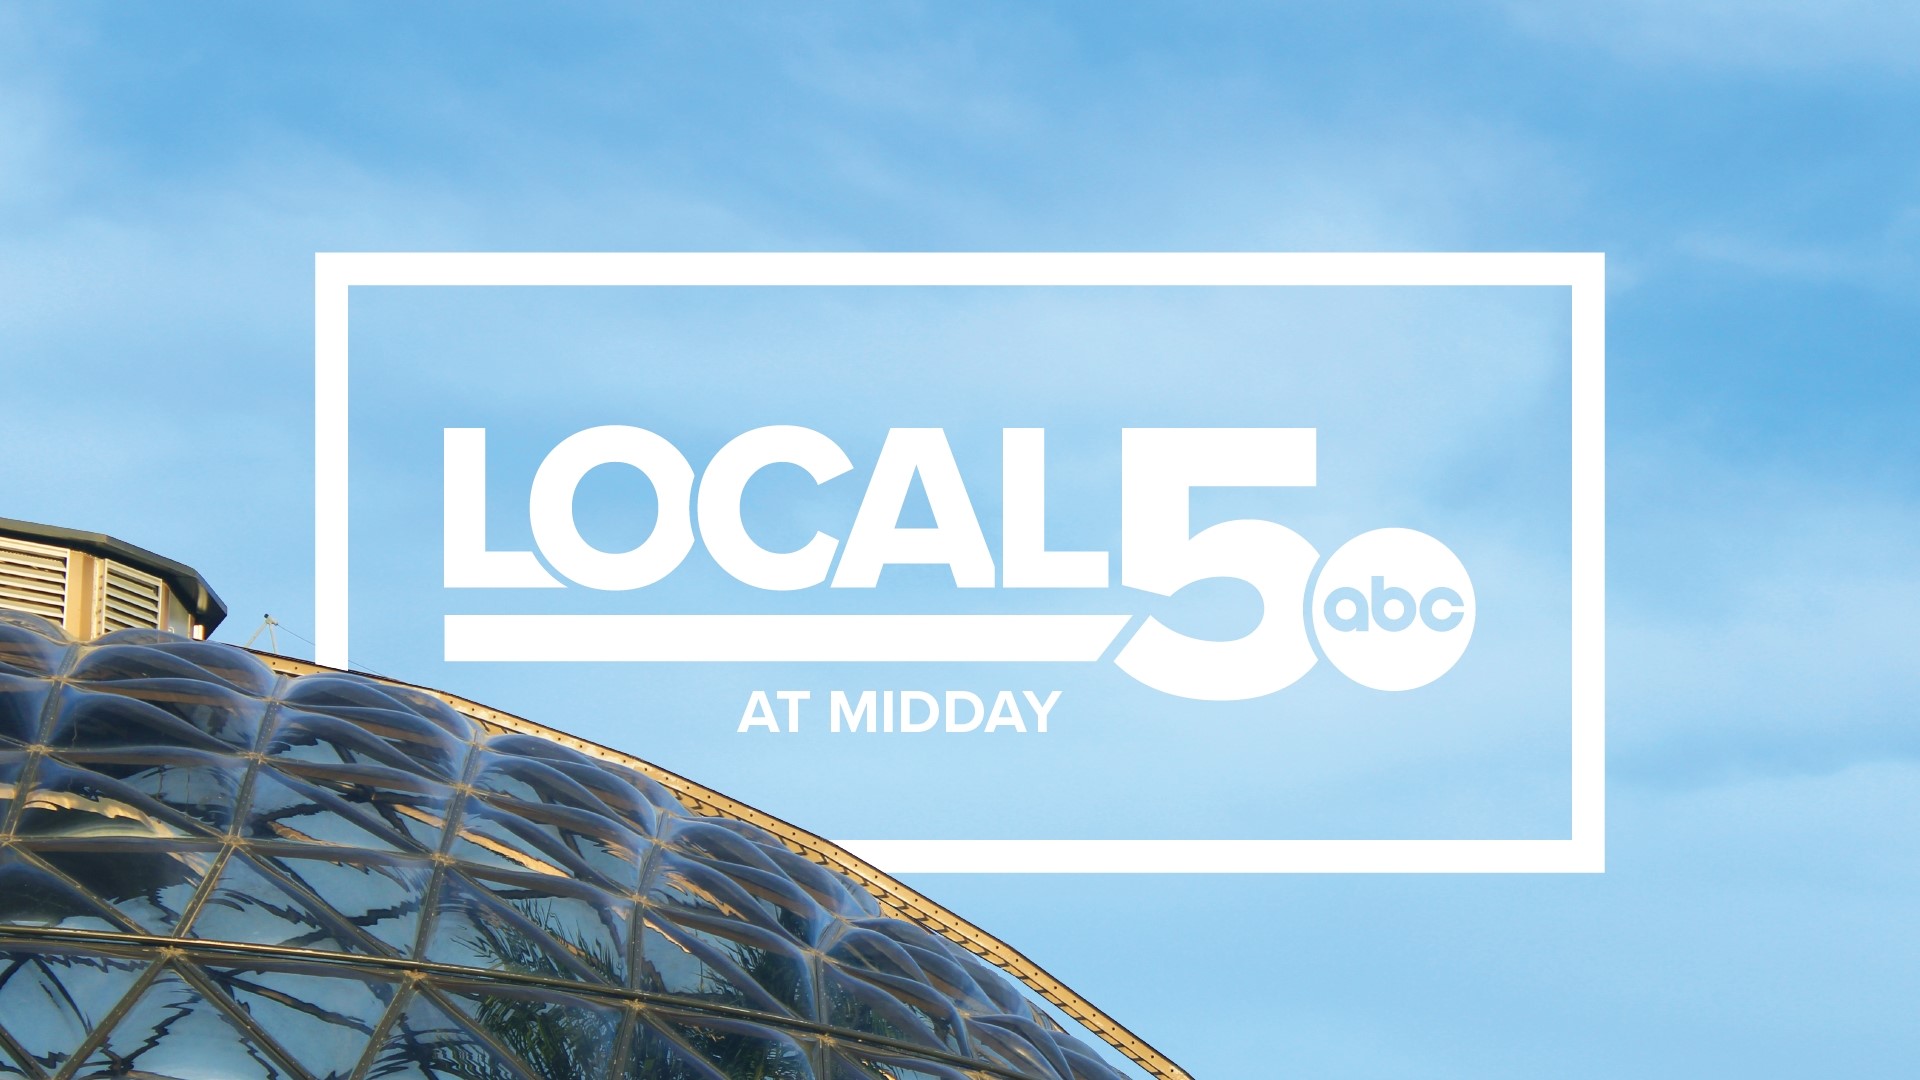 Local 5 News Midday gives you the latest local news and weather, plus headlines and news updates from across the country.